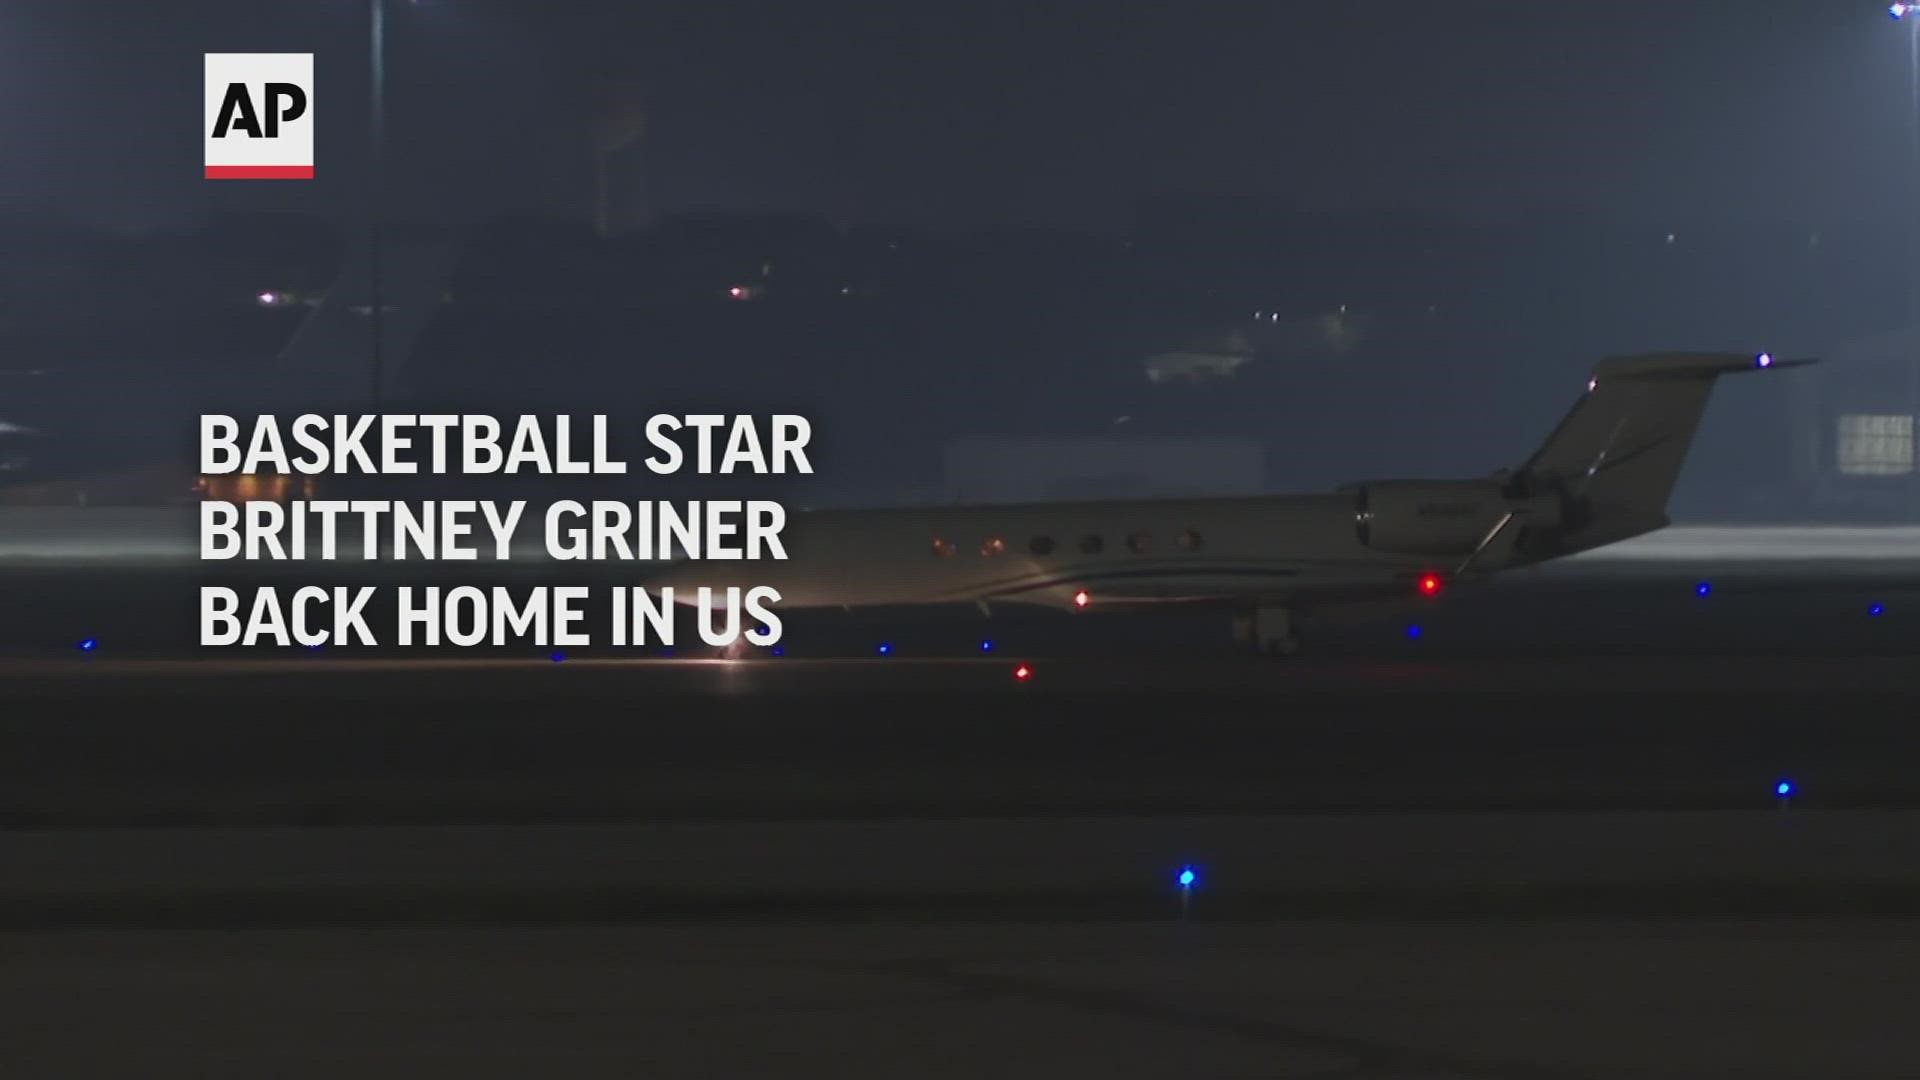 The plane's touchdown brings an end to a months-long saga that has sat in the public view for months, since Griner was arrested in February.